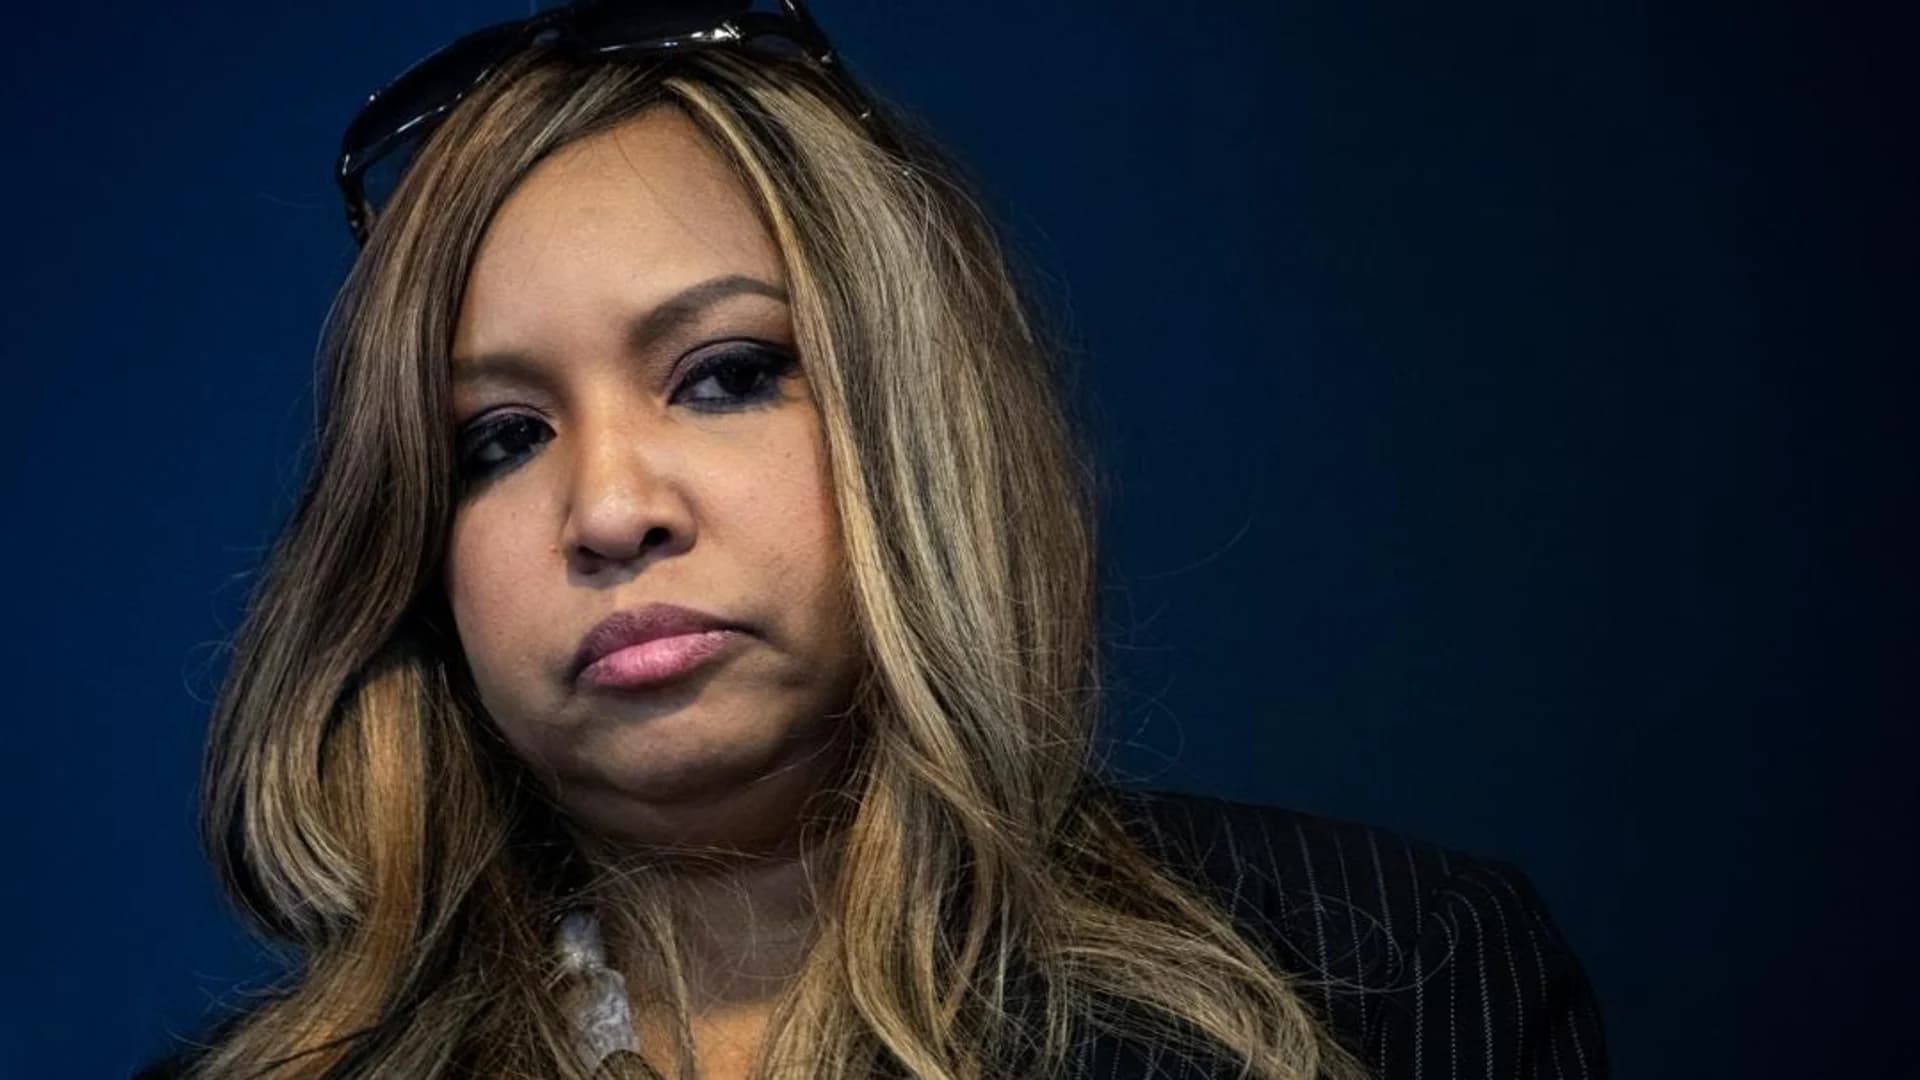 HUD administrator Lynne Patton gets stuck in NYCHA elevator